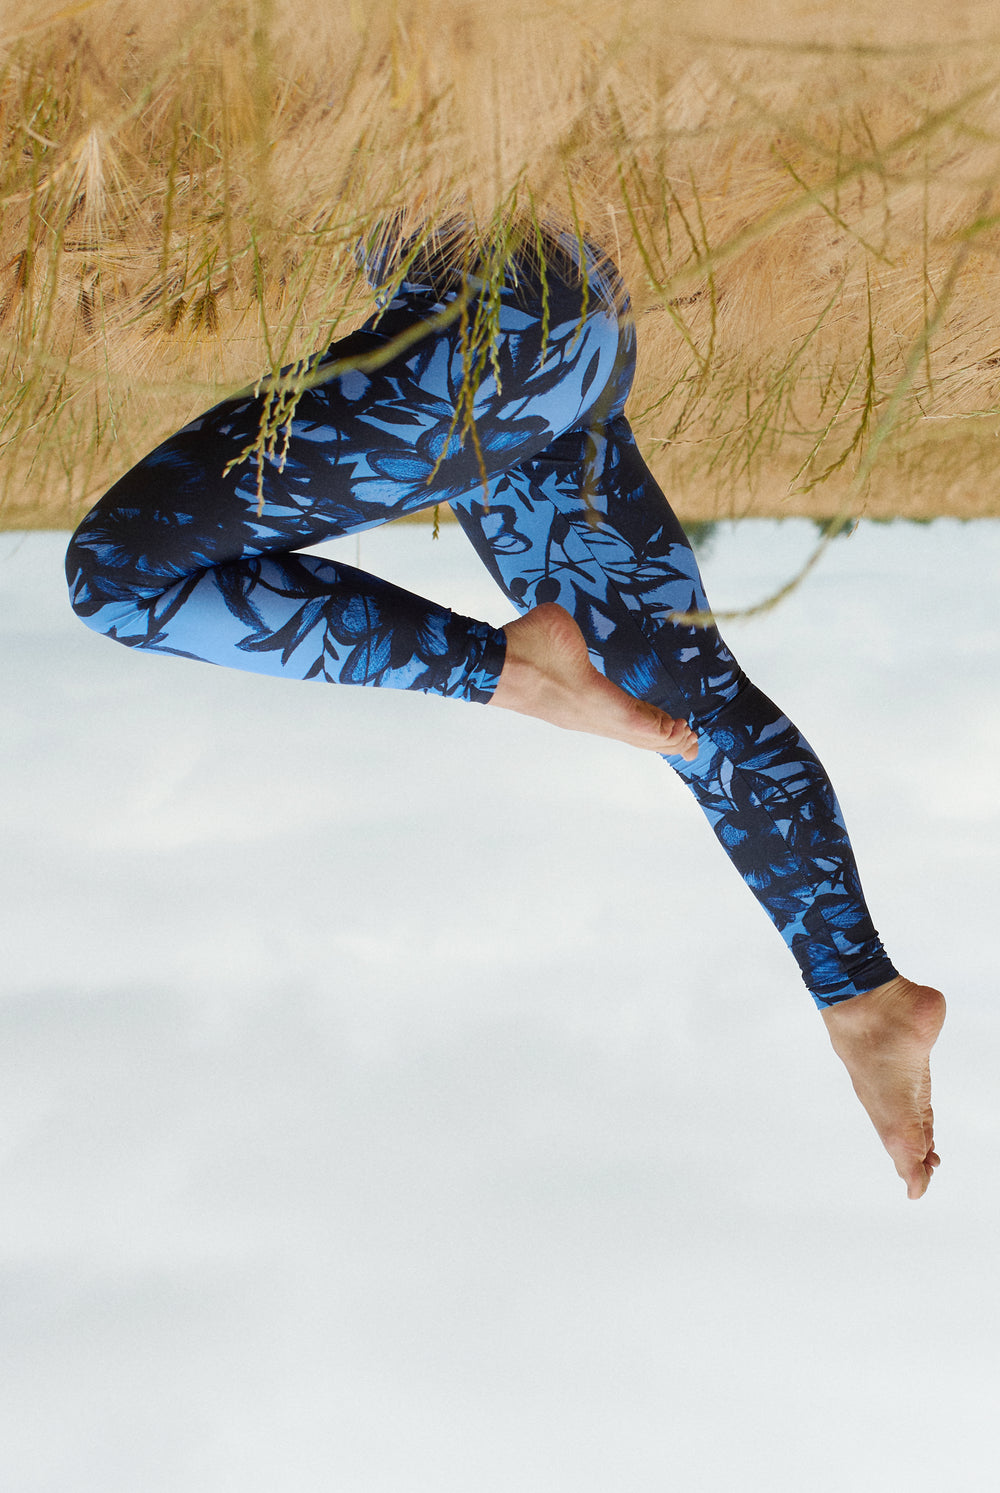 Experience the beauty of nature on your legs with these hand-painted flower leggings. Made with high-quality, breathable materials, these leggings will feel like a second skin. Each pair is hand-painted with intricate floral designs and made by hand in Paris, ensuring that no two are alike. Perfect for yoga, dance or everyday wear, these leggings will add a touch of elegance and uniqueness to any outfit.